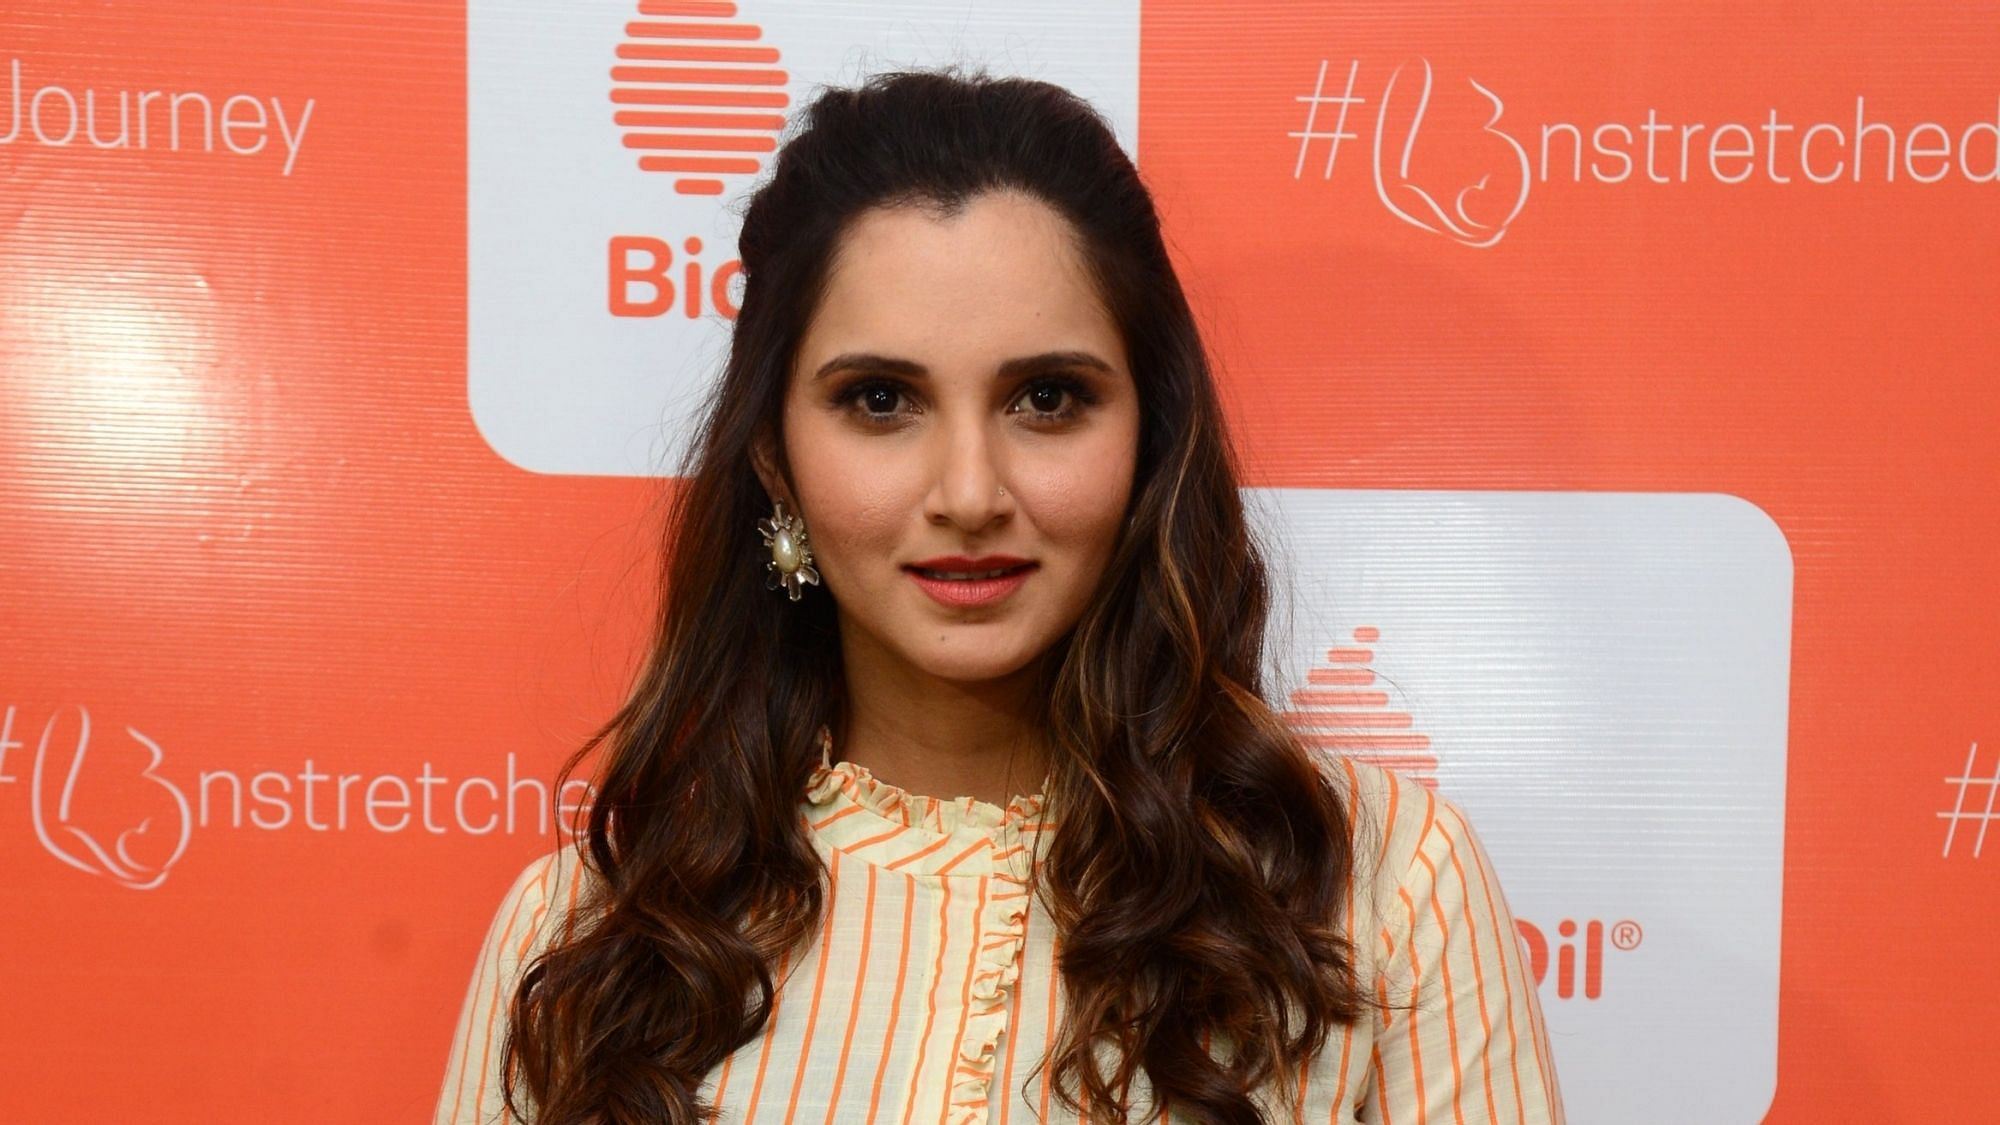 Sania Mirza talks about the difficulties she faced early in her tennis career.